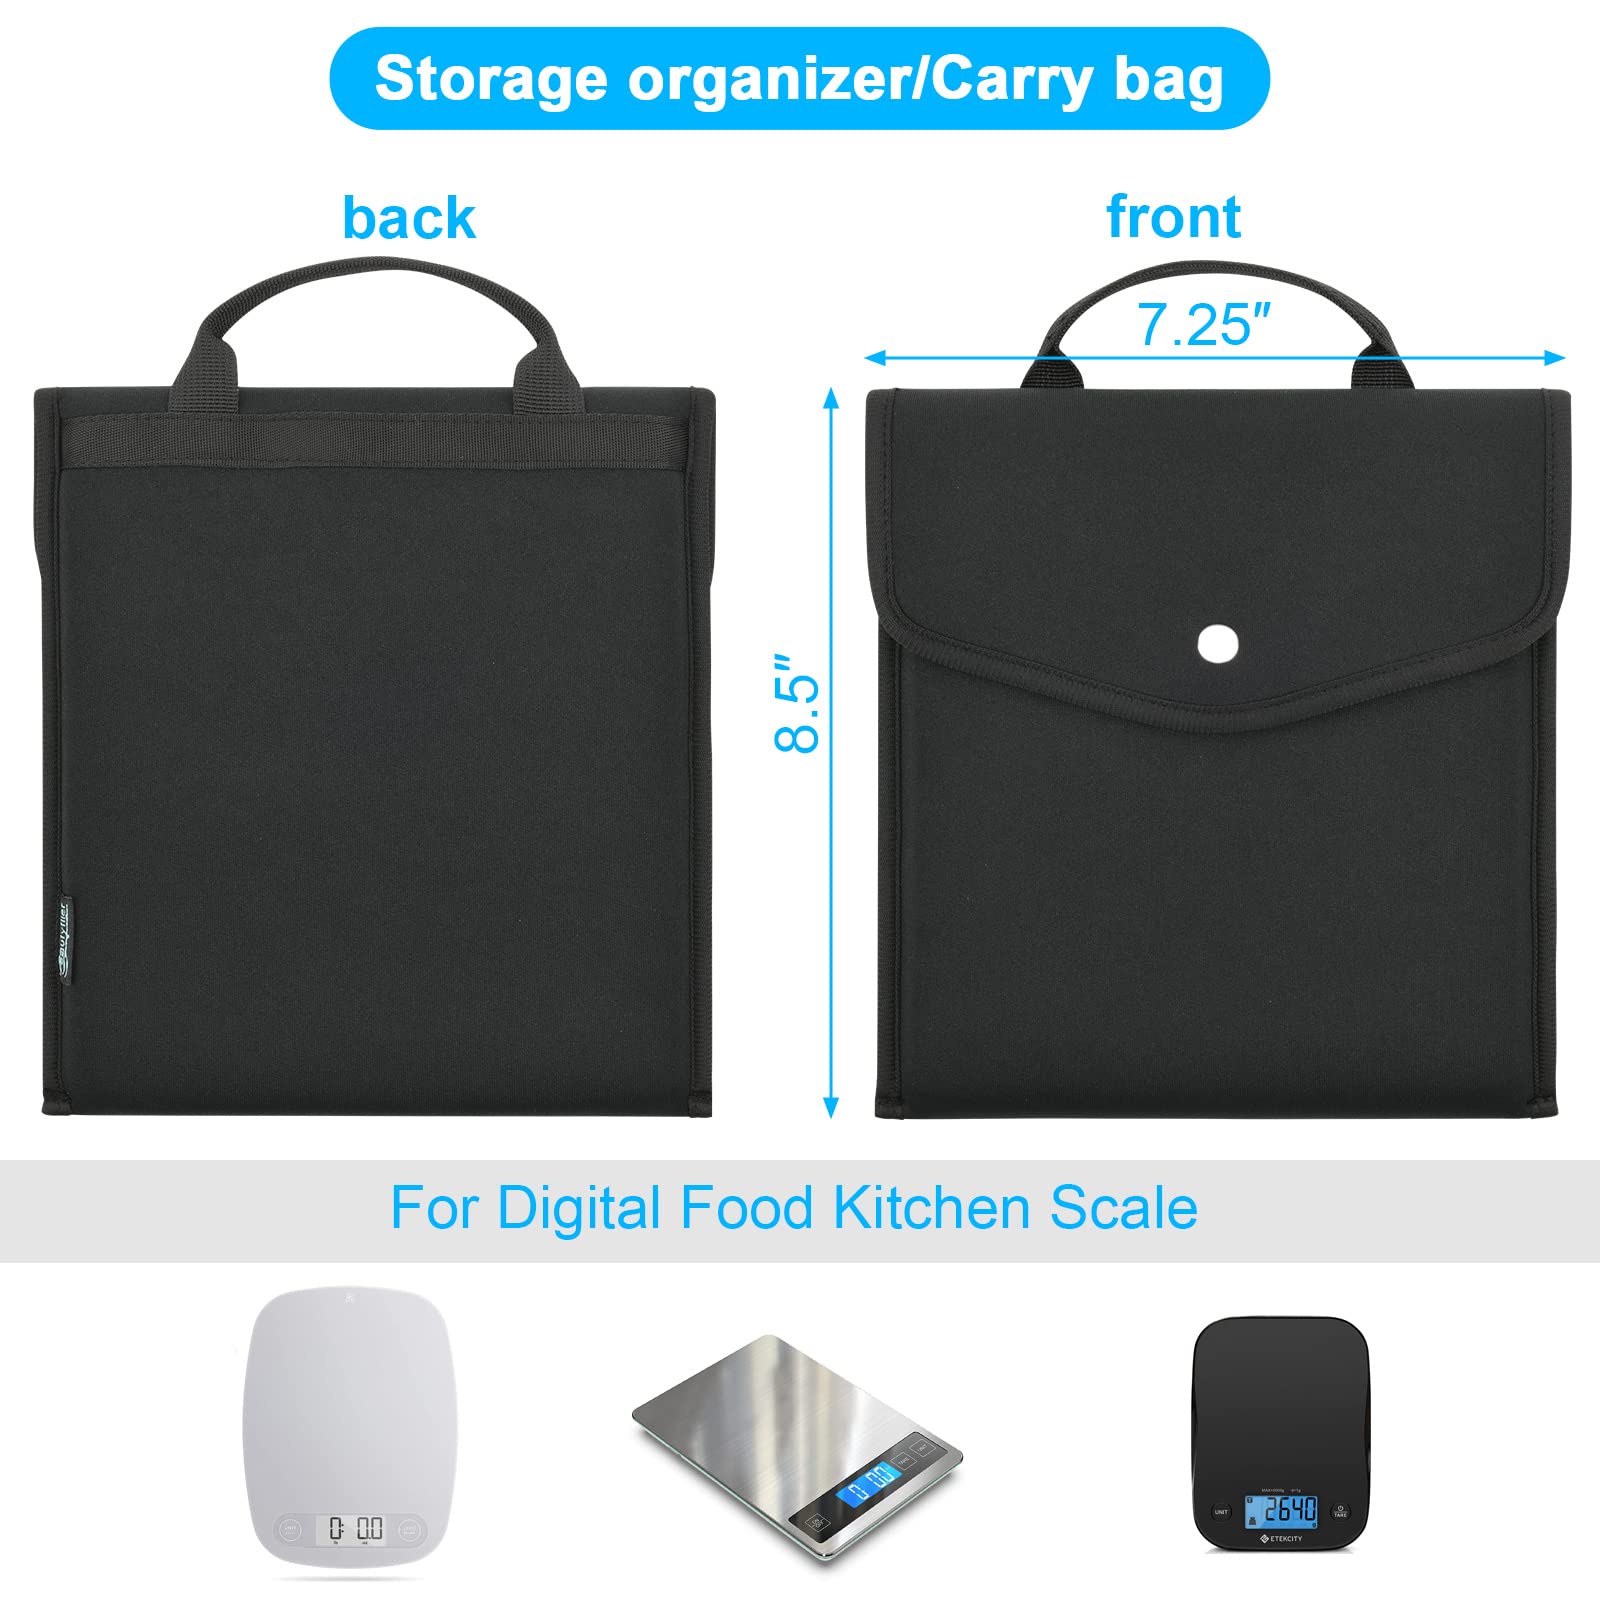 Beautyflier Carrying Case Compatible with Digital Food Kitchen Scale, Neoprene Dust Cover for Who Loving Baking and Cooking, Digital Not Include